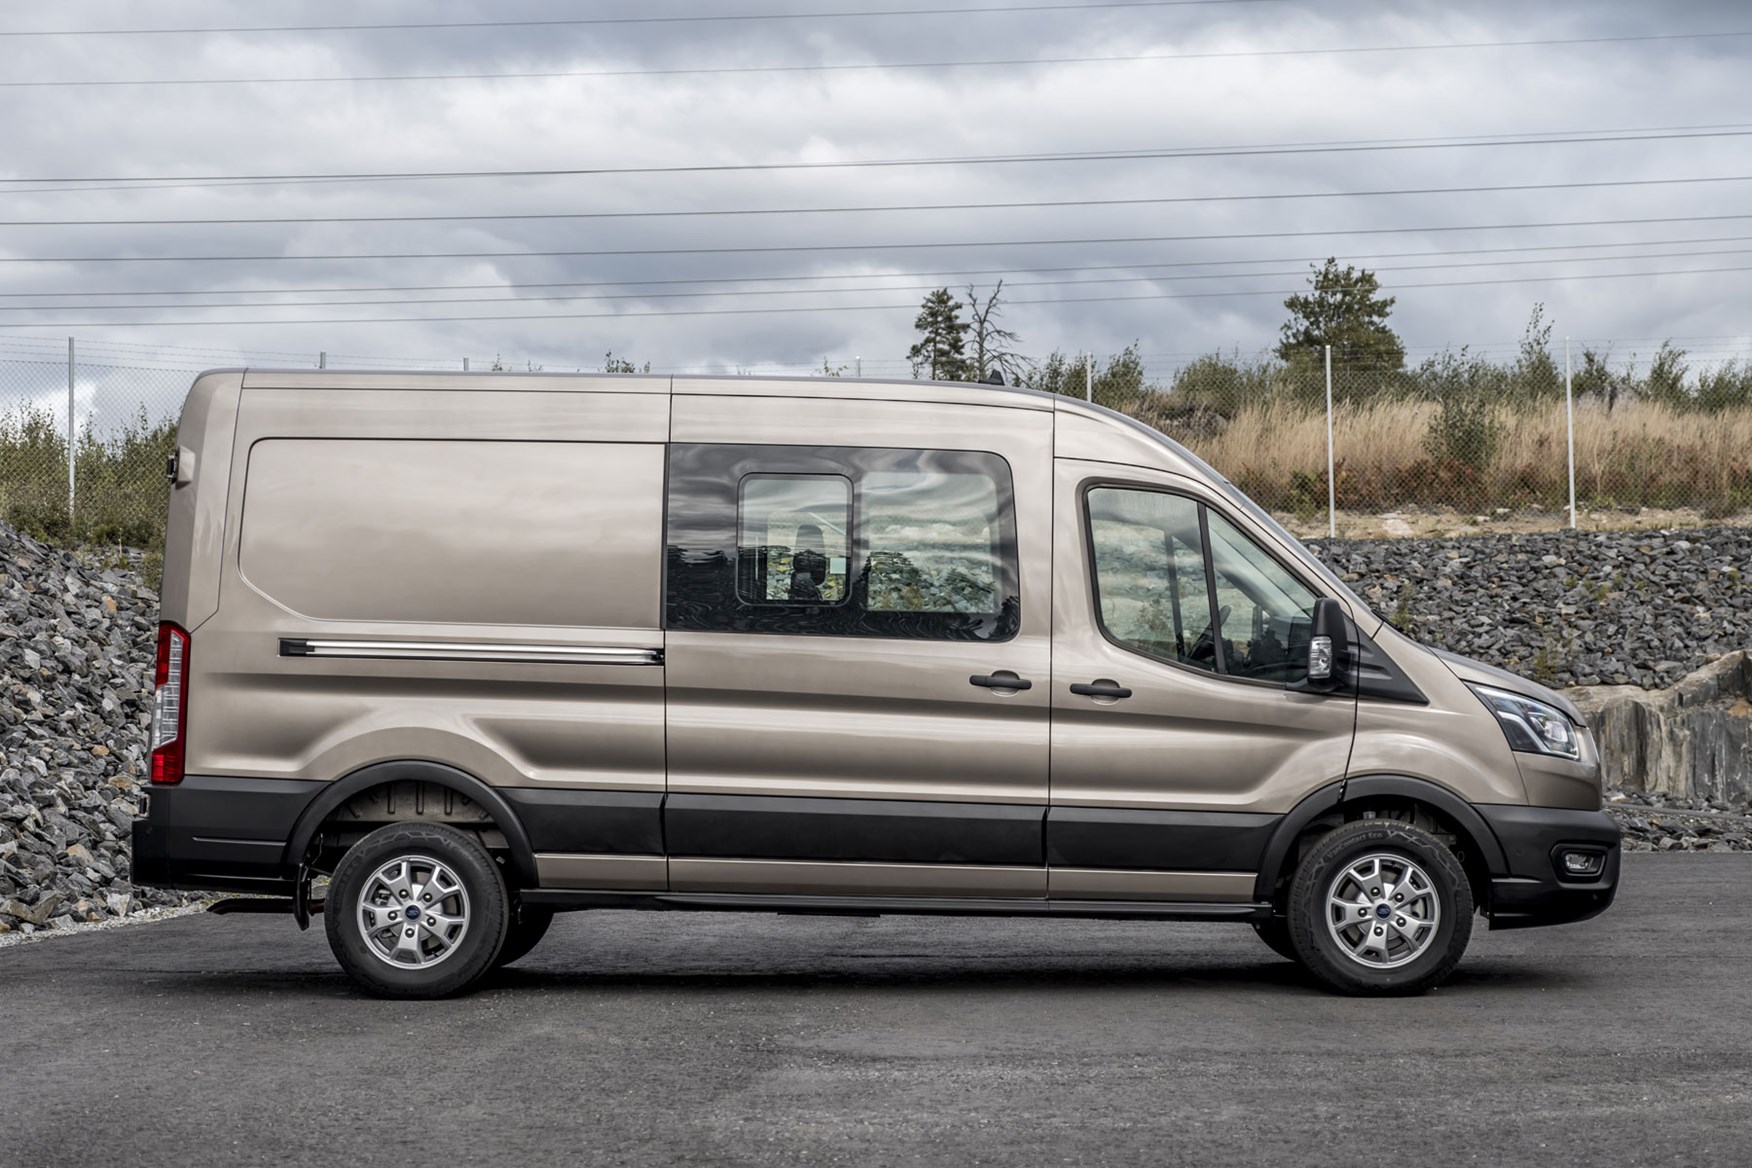 Ford Transit dimensions - 2019 facelift model, side view, DCiV